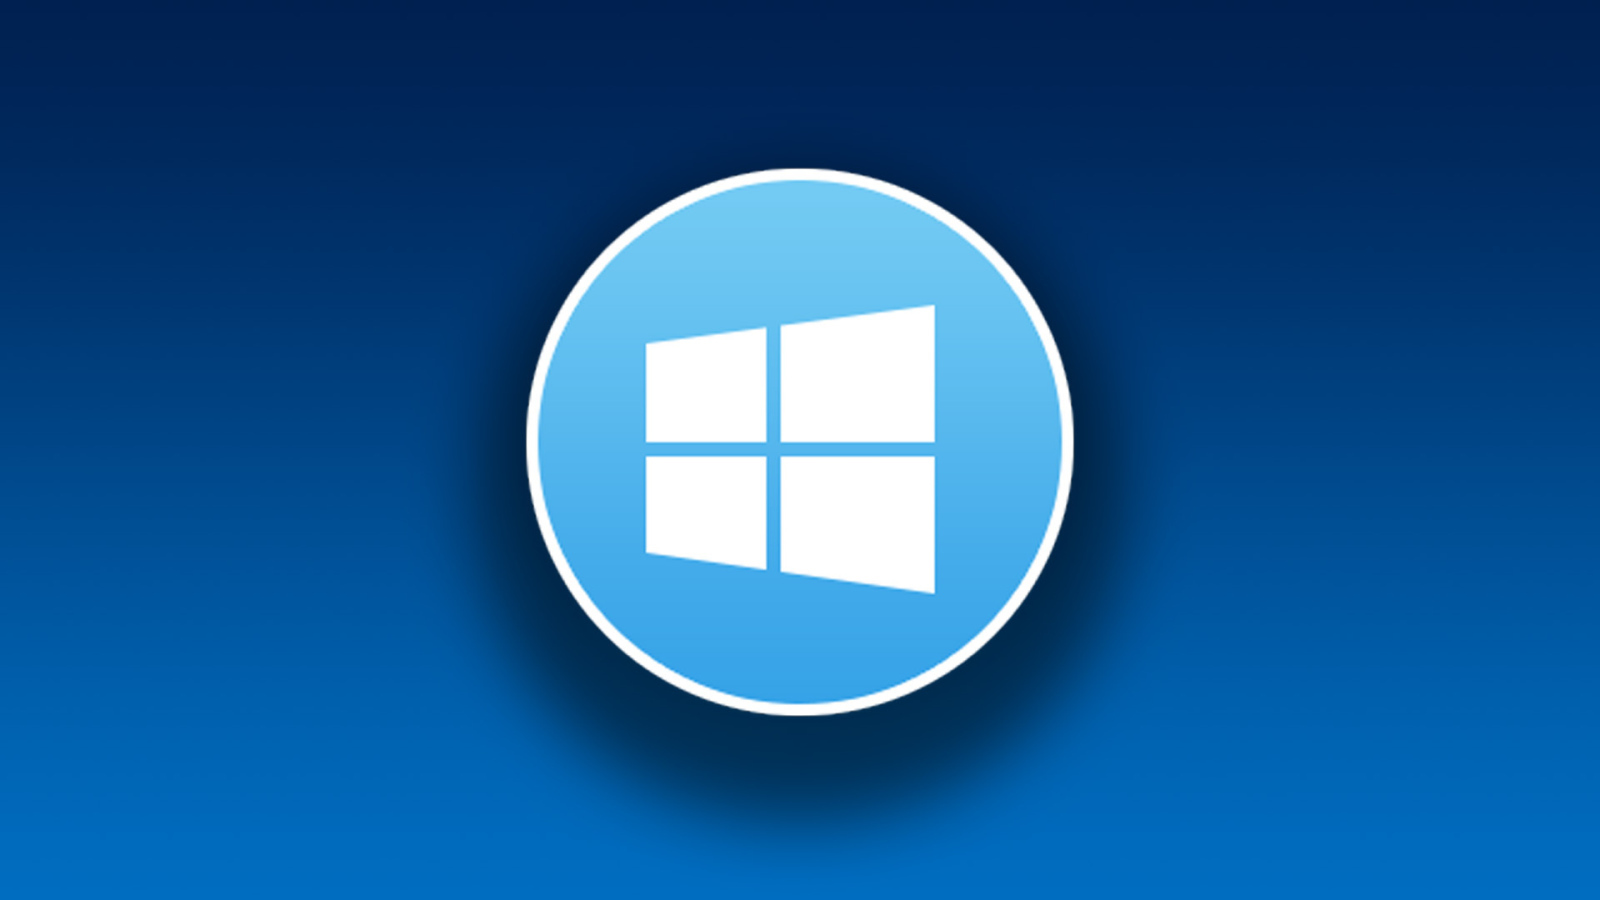 The new operating system Windows 10